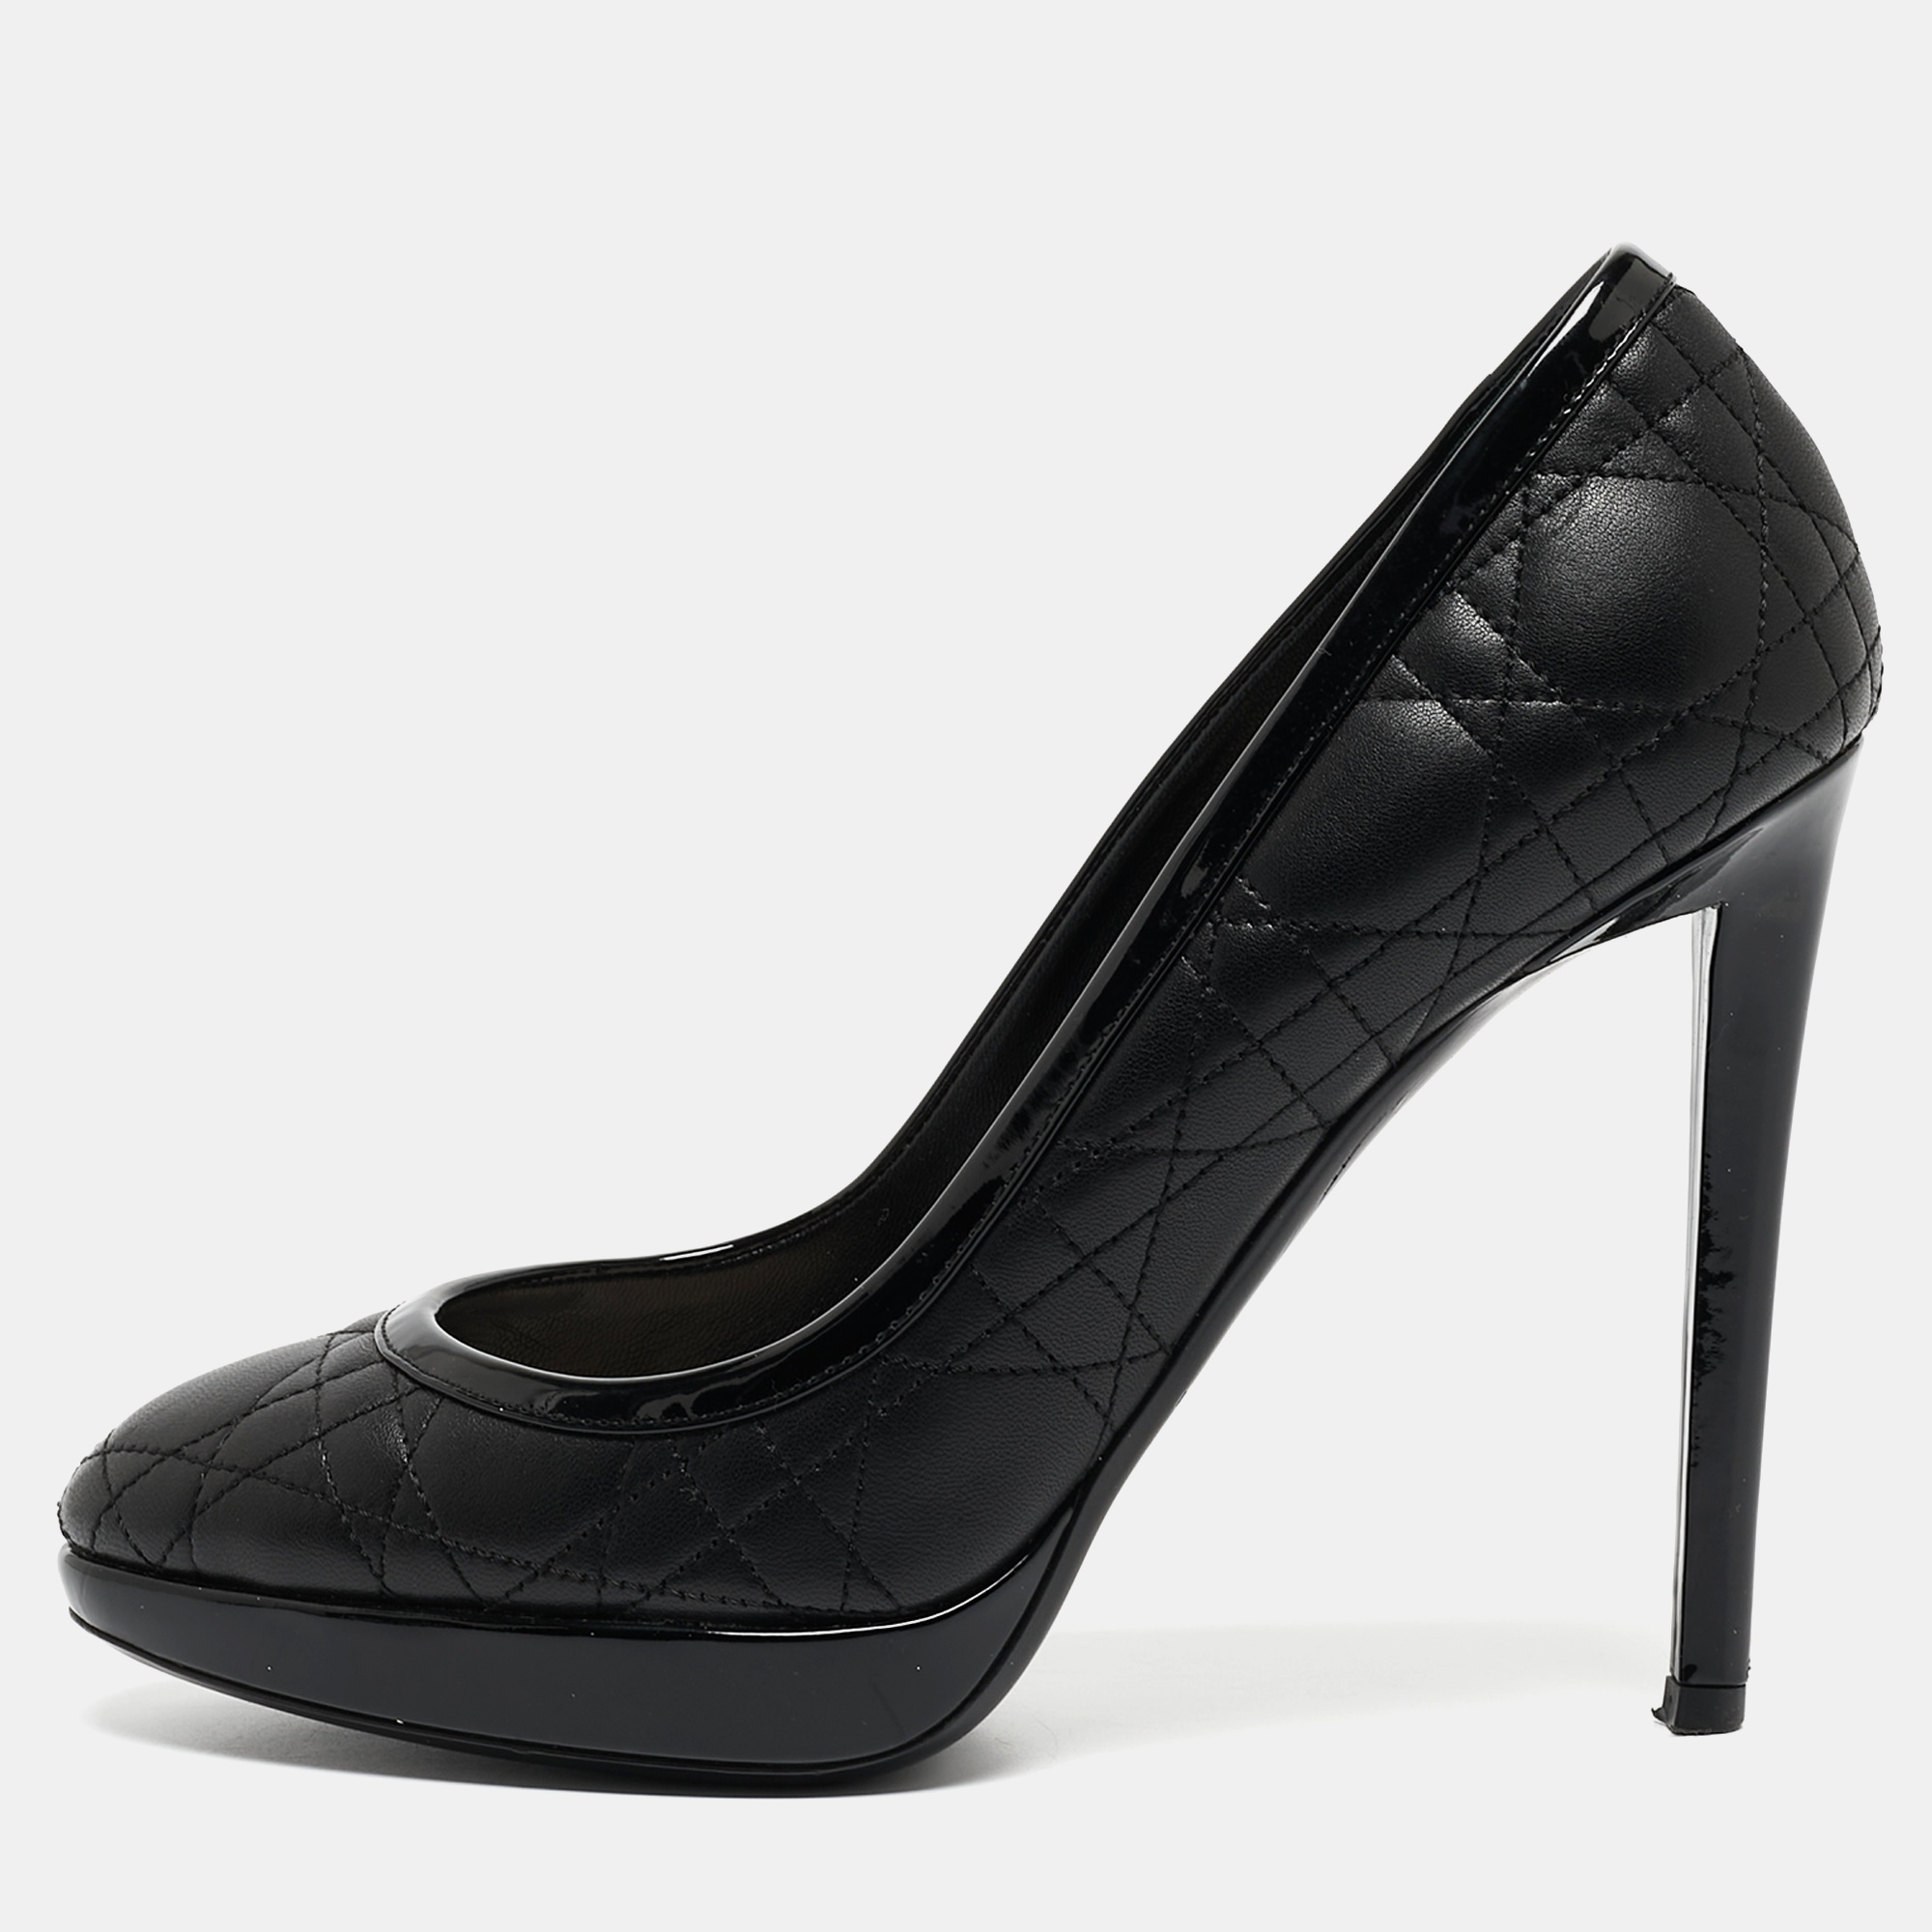 Dior Black Leather Cannage And Patent Round Toe Pumps Size 39